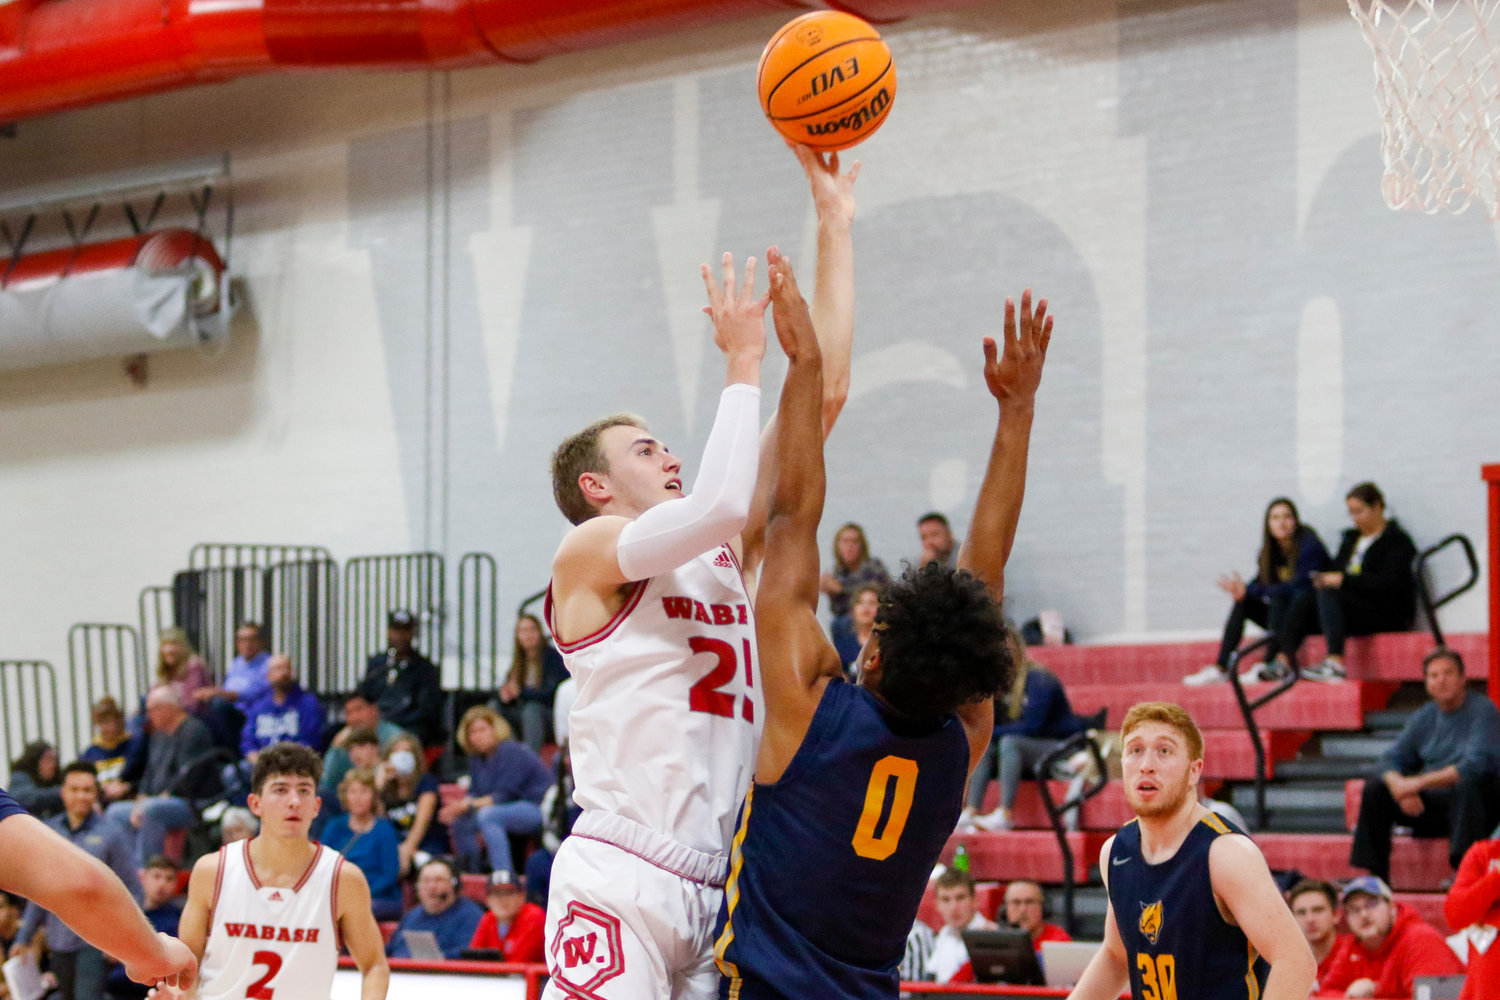 Junior Champ McCorkle scored 18 points in the 81-78 season opening win for Wabash on Tuesday night.